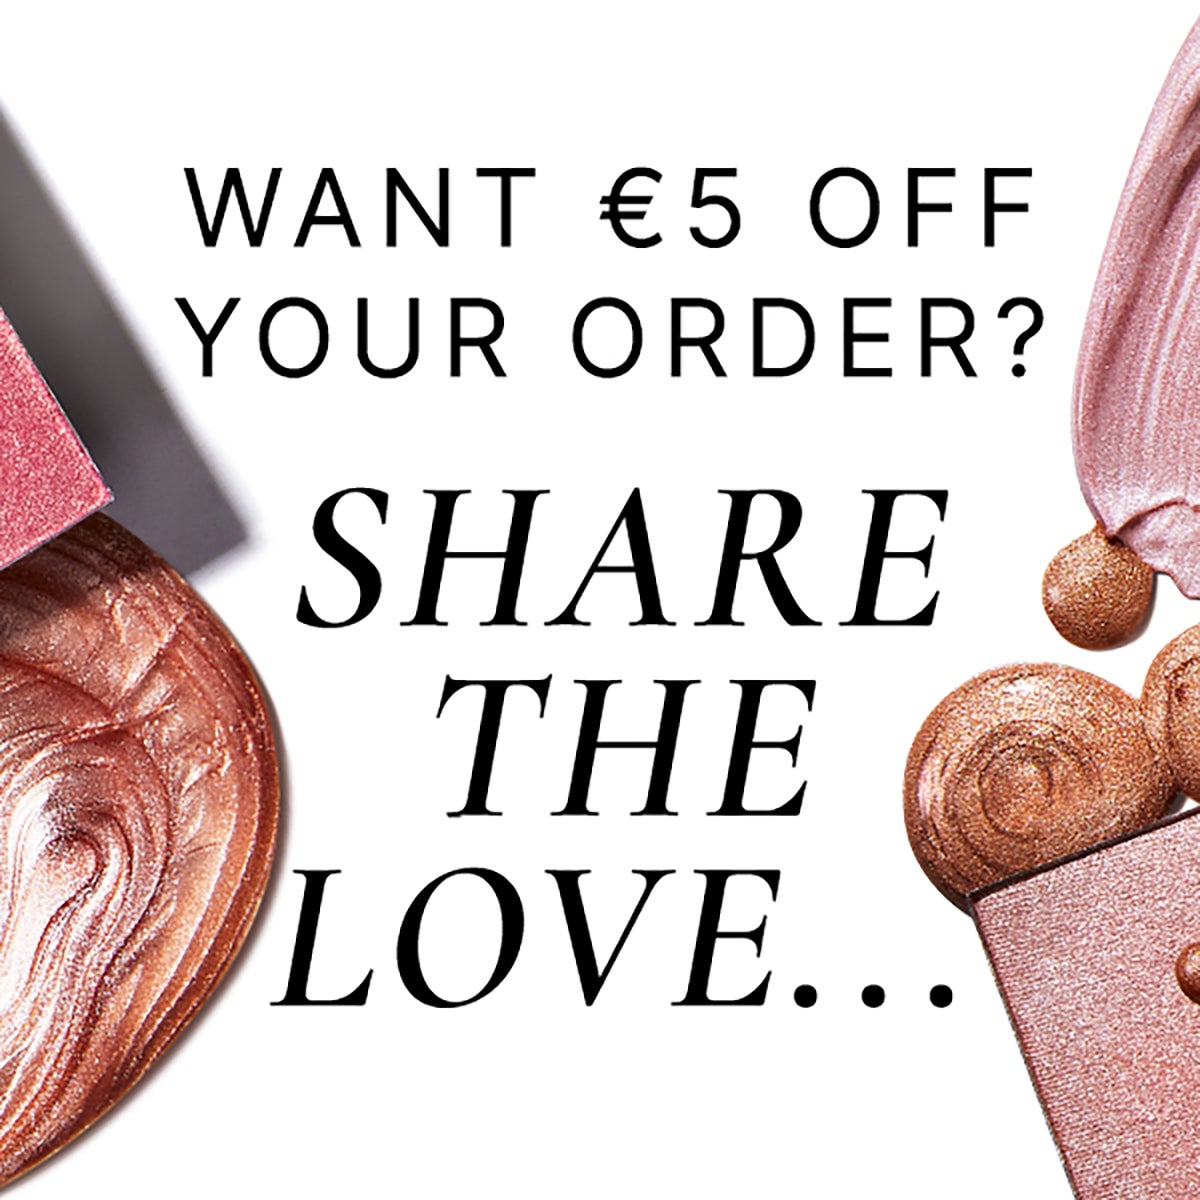 Want €5 off your order? Share the love